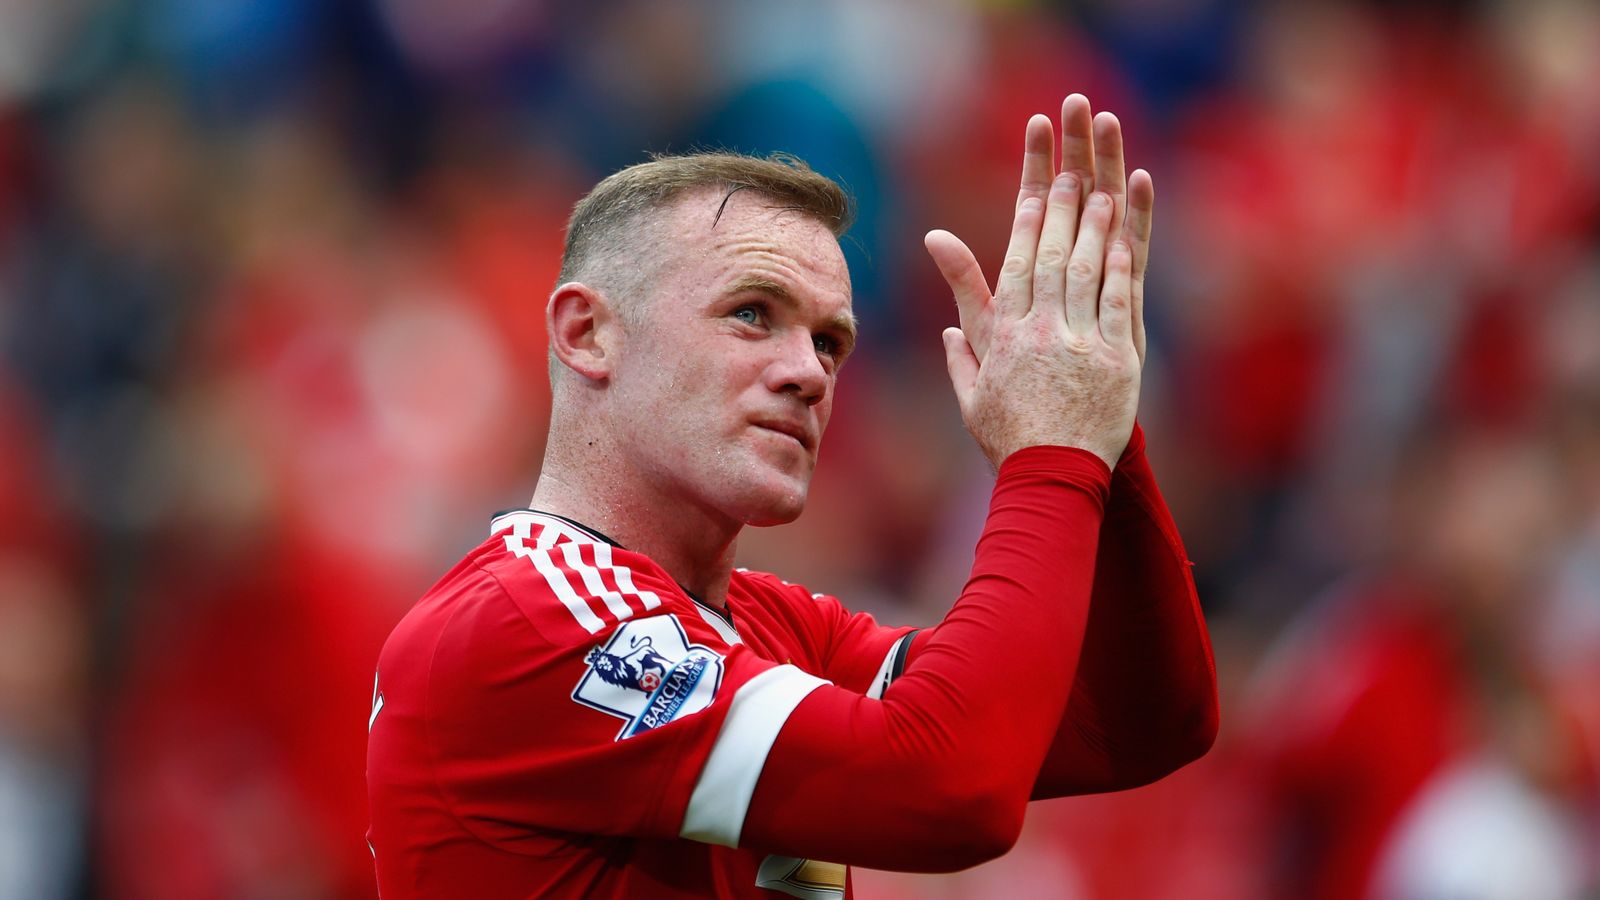 Wayne Rooney's 500th appearance: Manchester United career in numbers